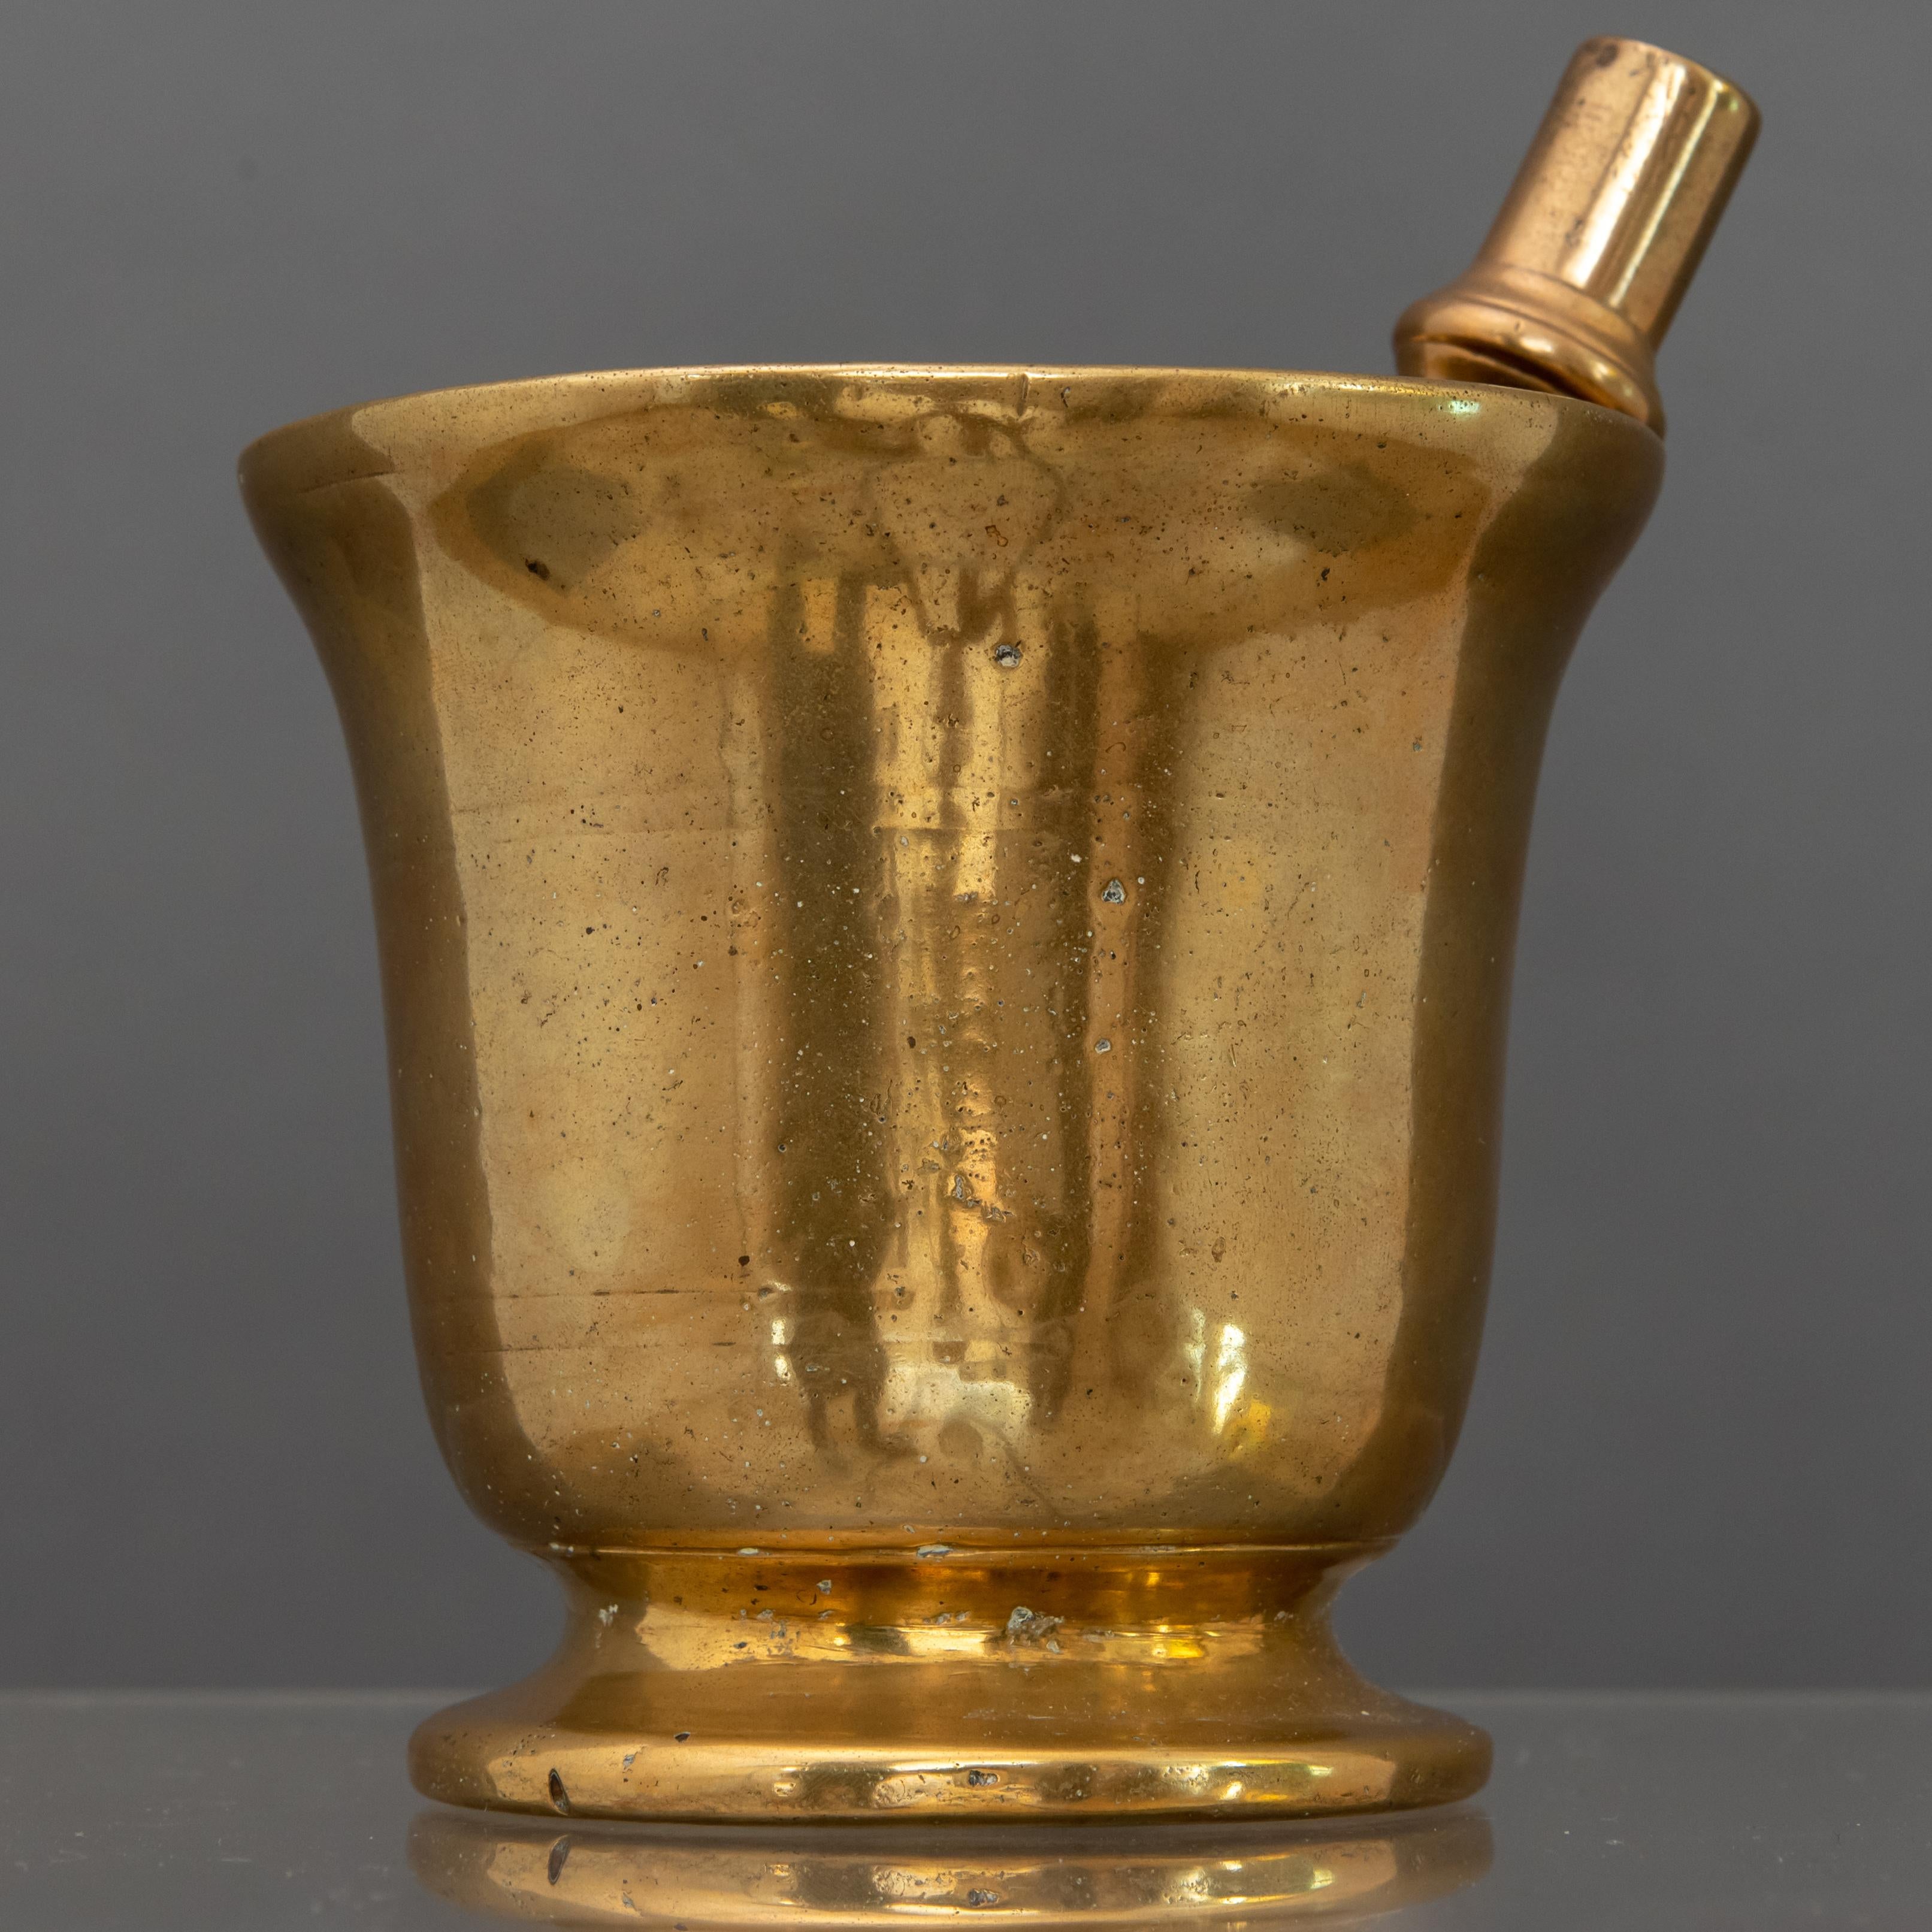 Gilded bronze mortar with a smooth cylindrical shape and wide mouth, complete with its original pestle.
Italy, 18th century

Every item of our Gallery, upon request, is accompanied by a certificate of authenticity issued by Sabrina Egidi official